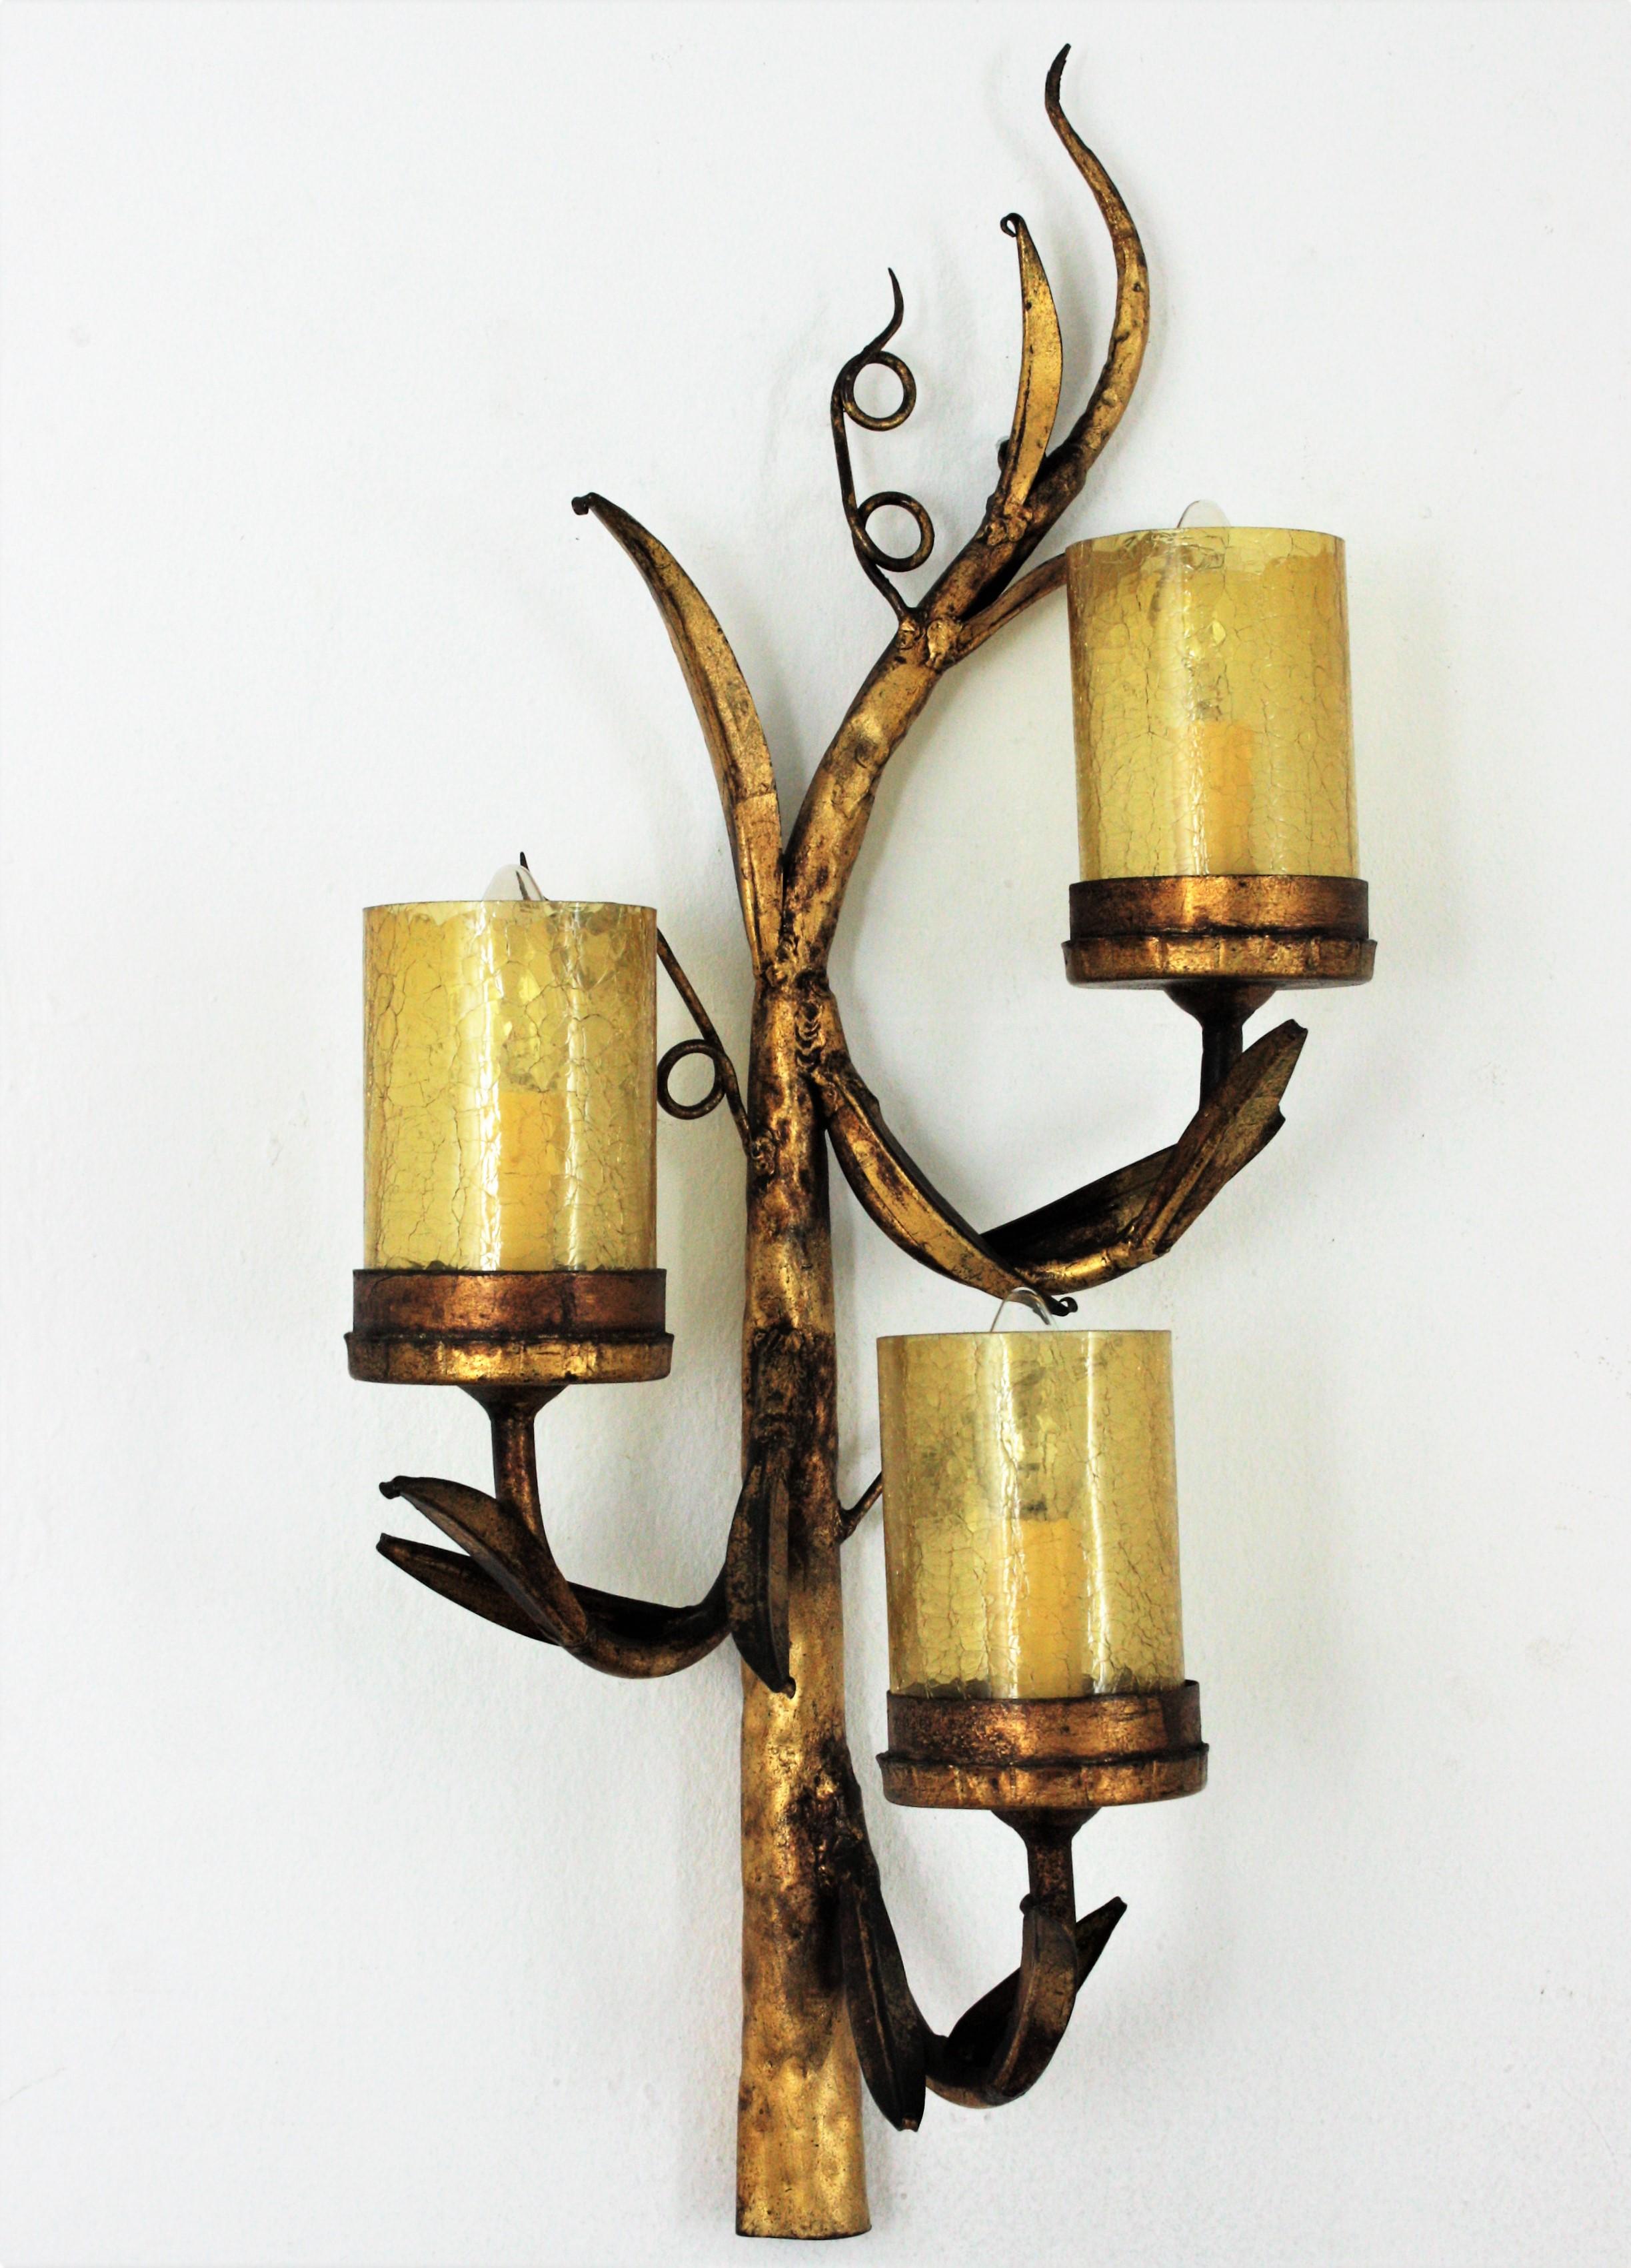 Three-arm branch wall light / foliage wall sconce with amber cracked glass cylinder shades, Spain, 1950s.
This brutalist wall sconce features a tree form light fixture with three branches holding cylinder glass shades. Foliage details adorning the